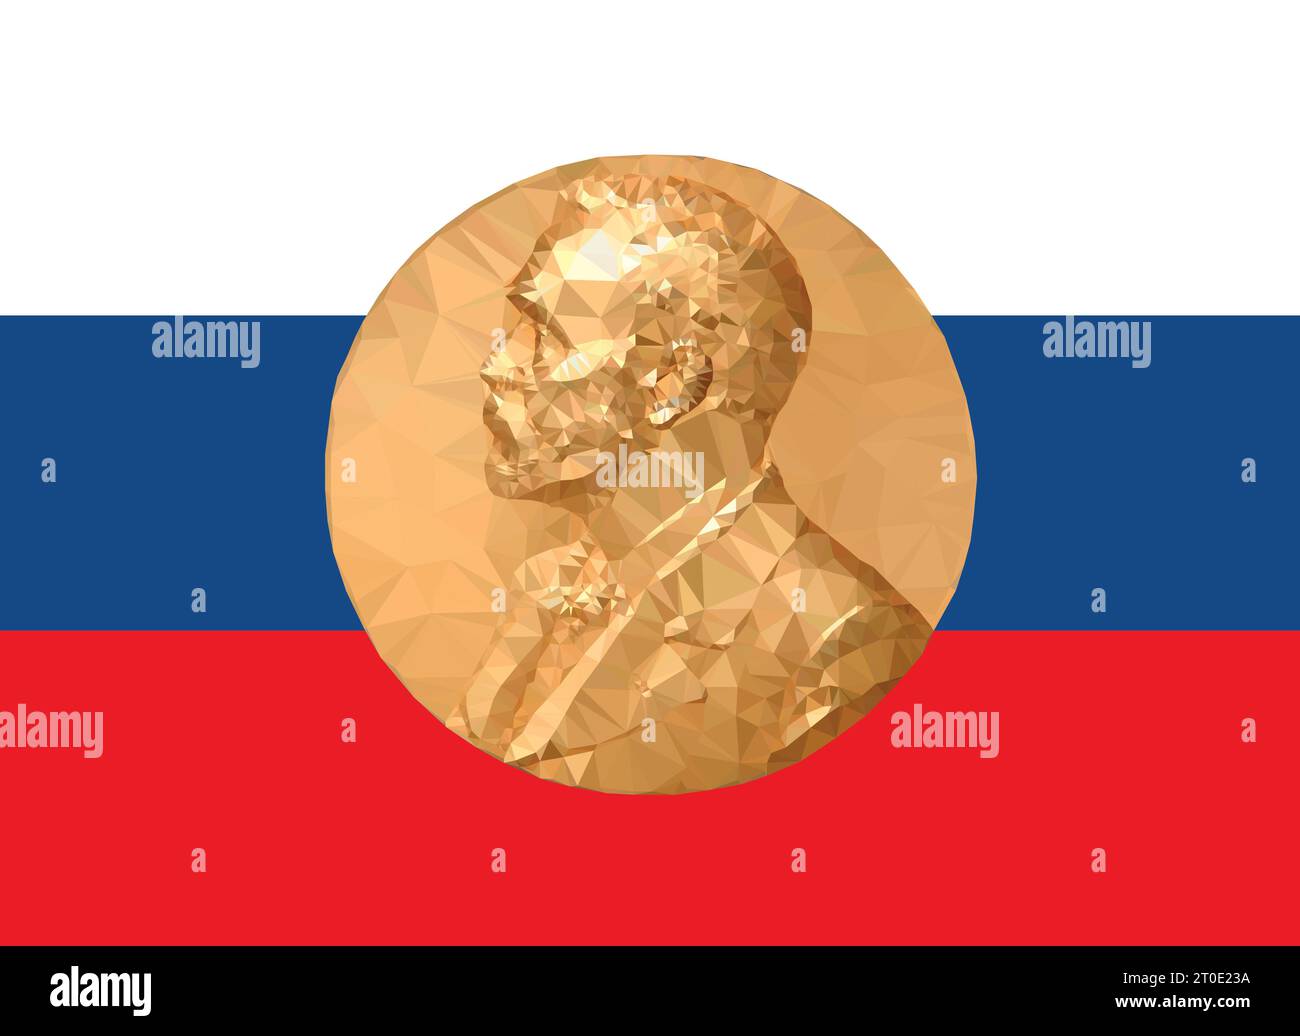 Gold Medal Nobel prize with Russia flag in background, vector illustration Stock Vector